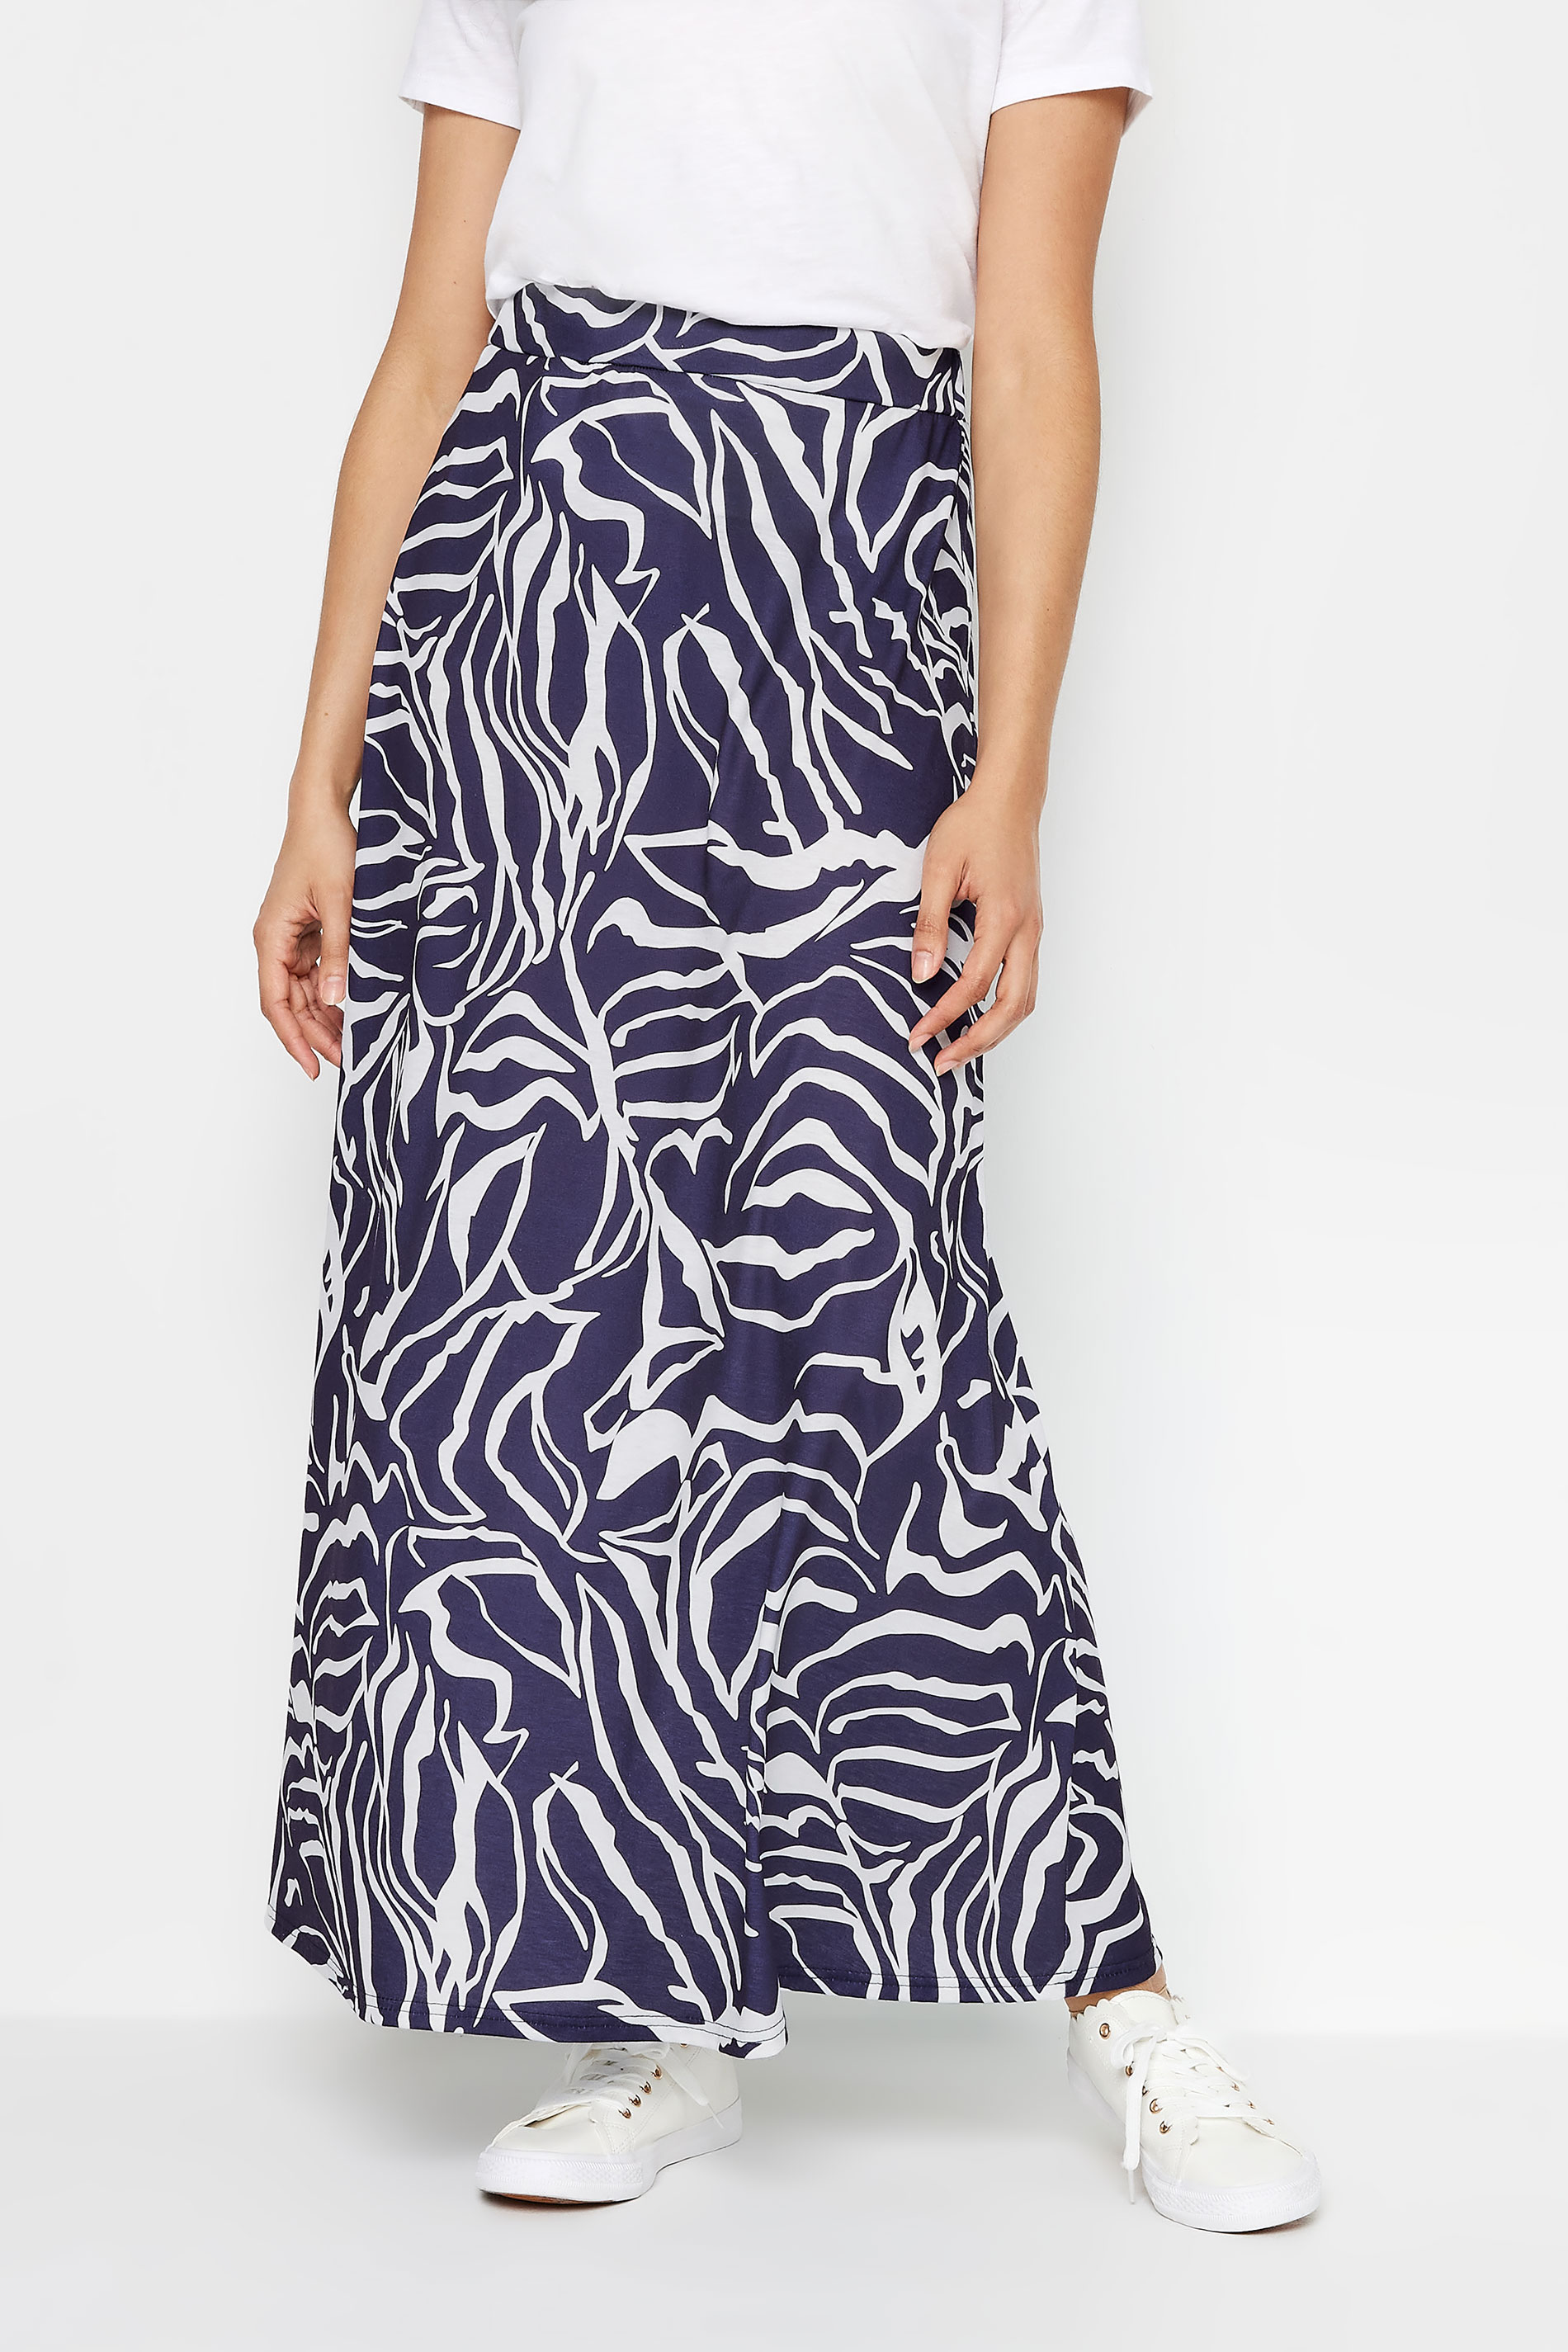 M&Co Navy Blue Abstract Print Maxi Skirt | M&Co 1